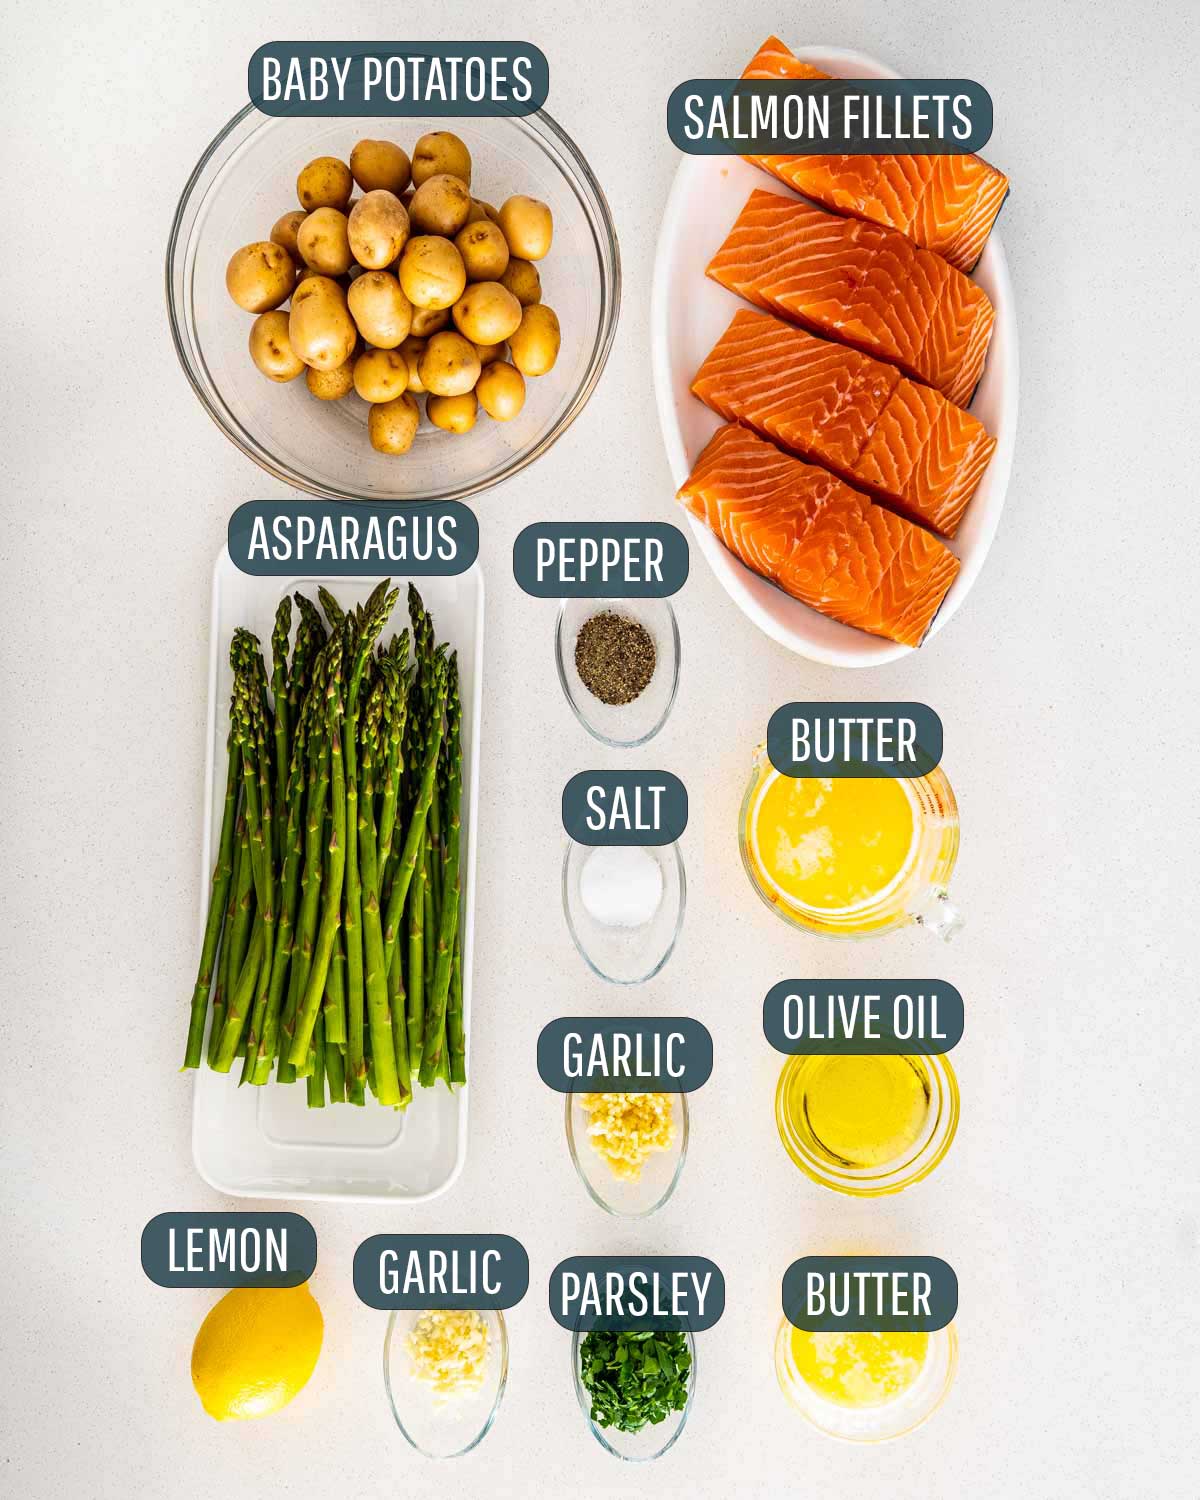 ingredients needed to make garlic butter salmon with baby potatoes and asparagus.